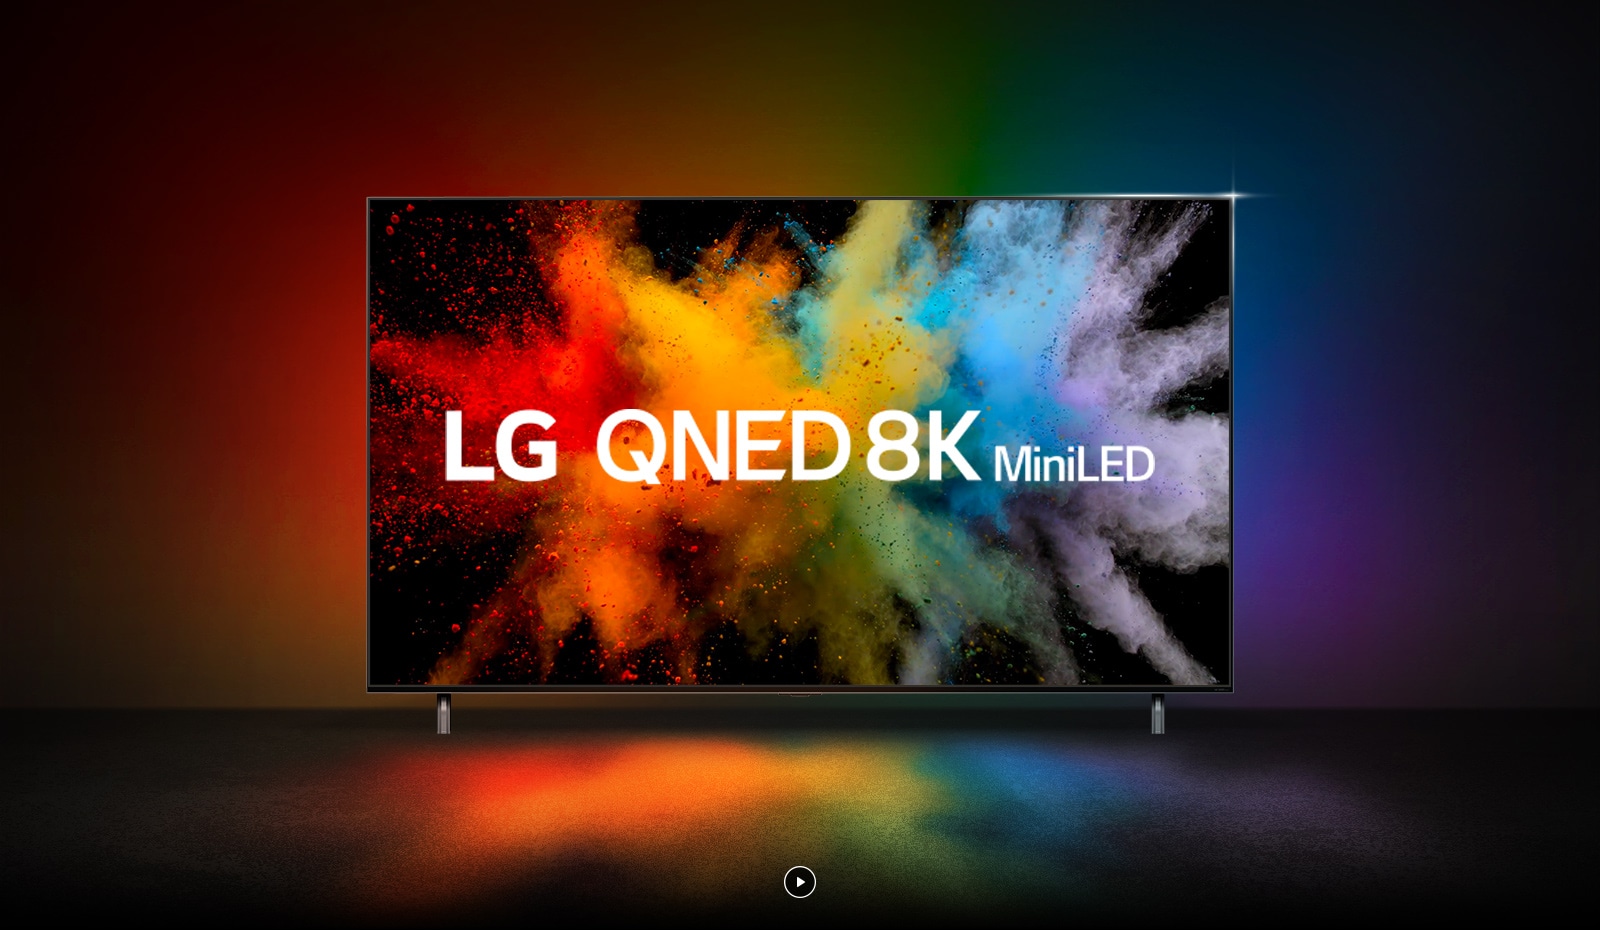 Typo-motion of QNED and NanoCell overlap and explode into color powder. LG QNED 8K miniLED logo appears on TV. 